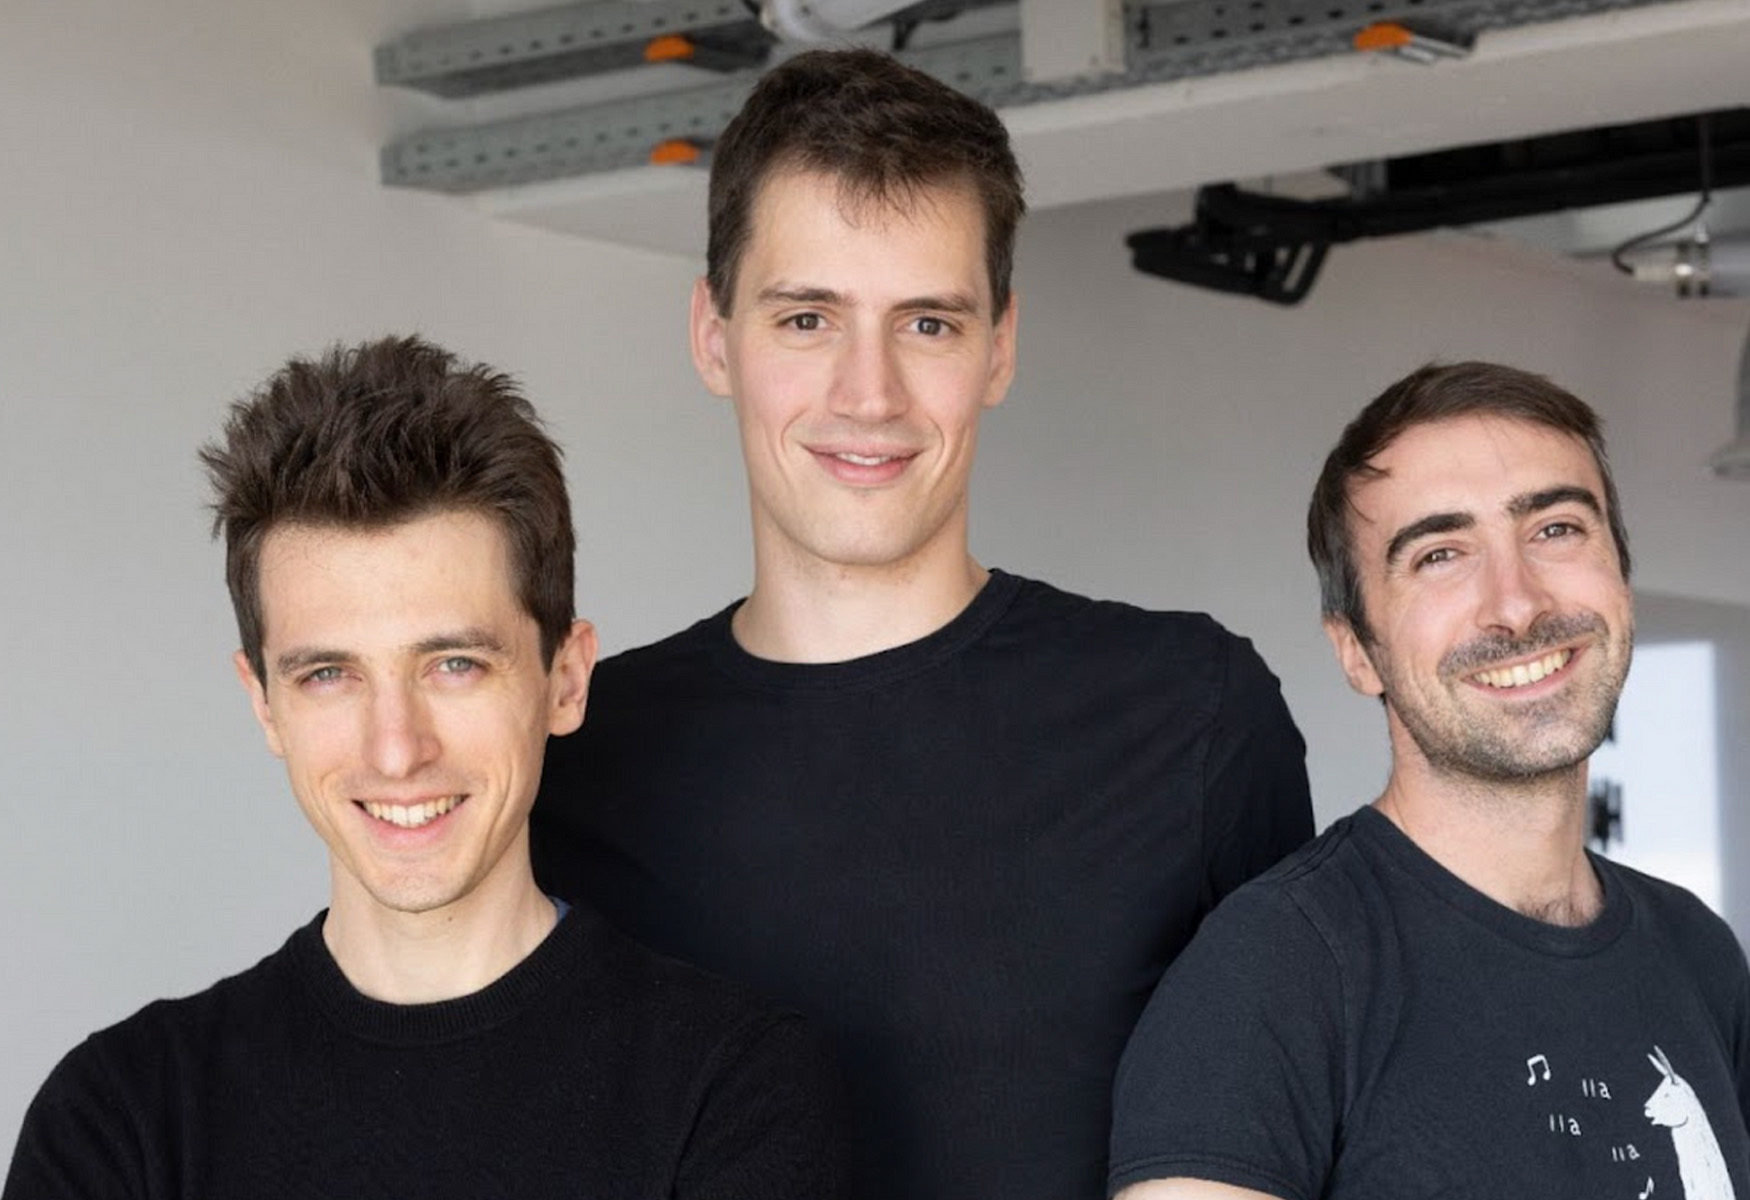 Mistral AI Raises €450M In Funding Round, Driving The Fight For AI Sovereignty In Europe